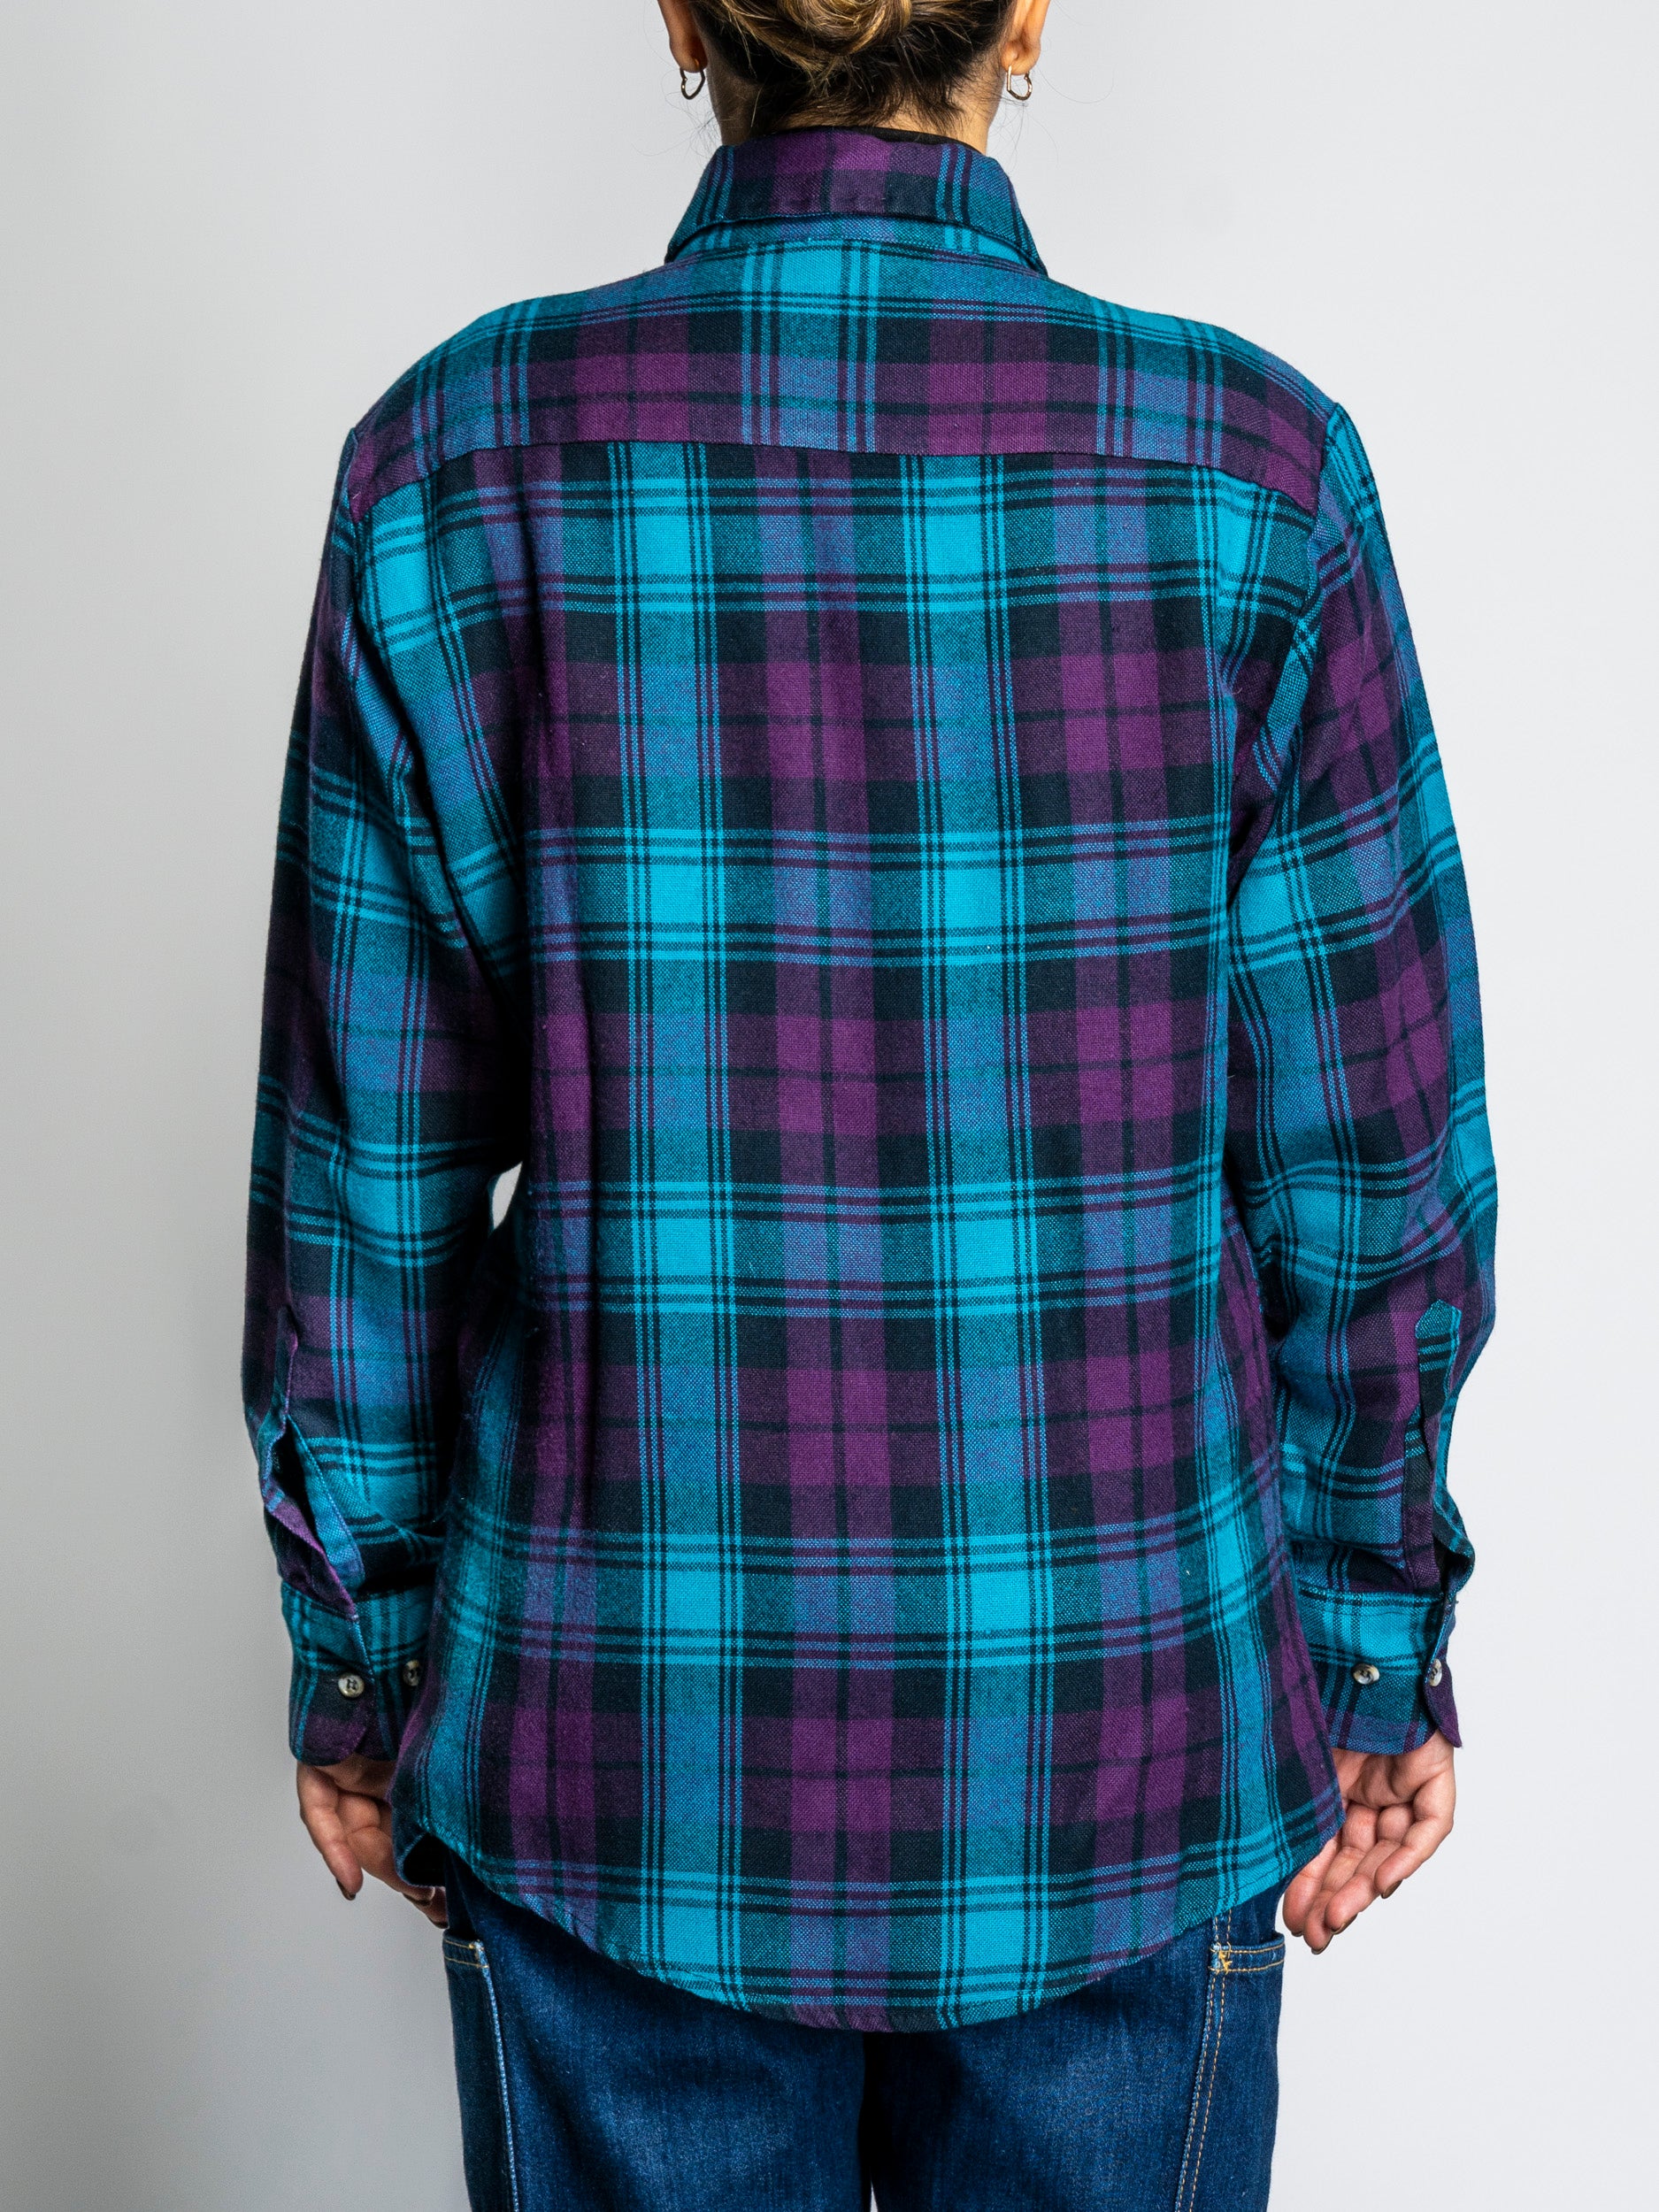 VINTAGE NORTHWEST TERRITORY BLUE AND PURPLE CHECKED SHIRT